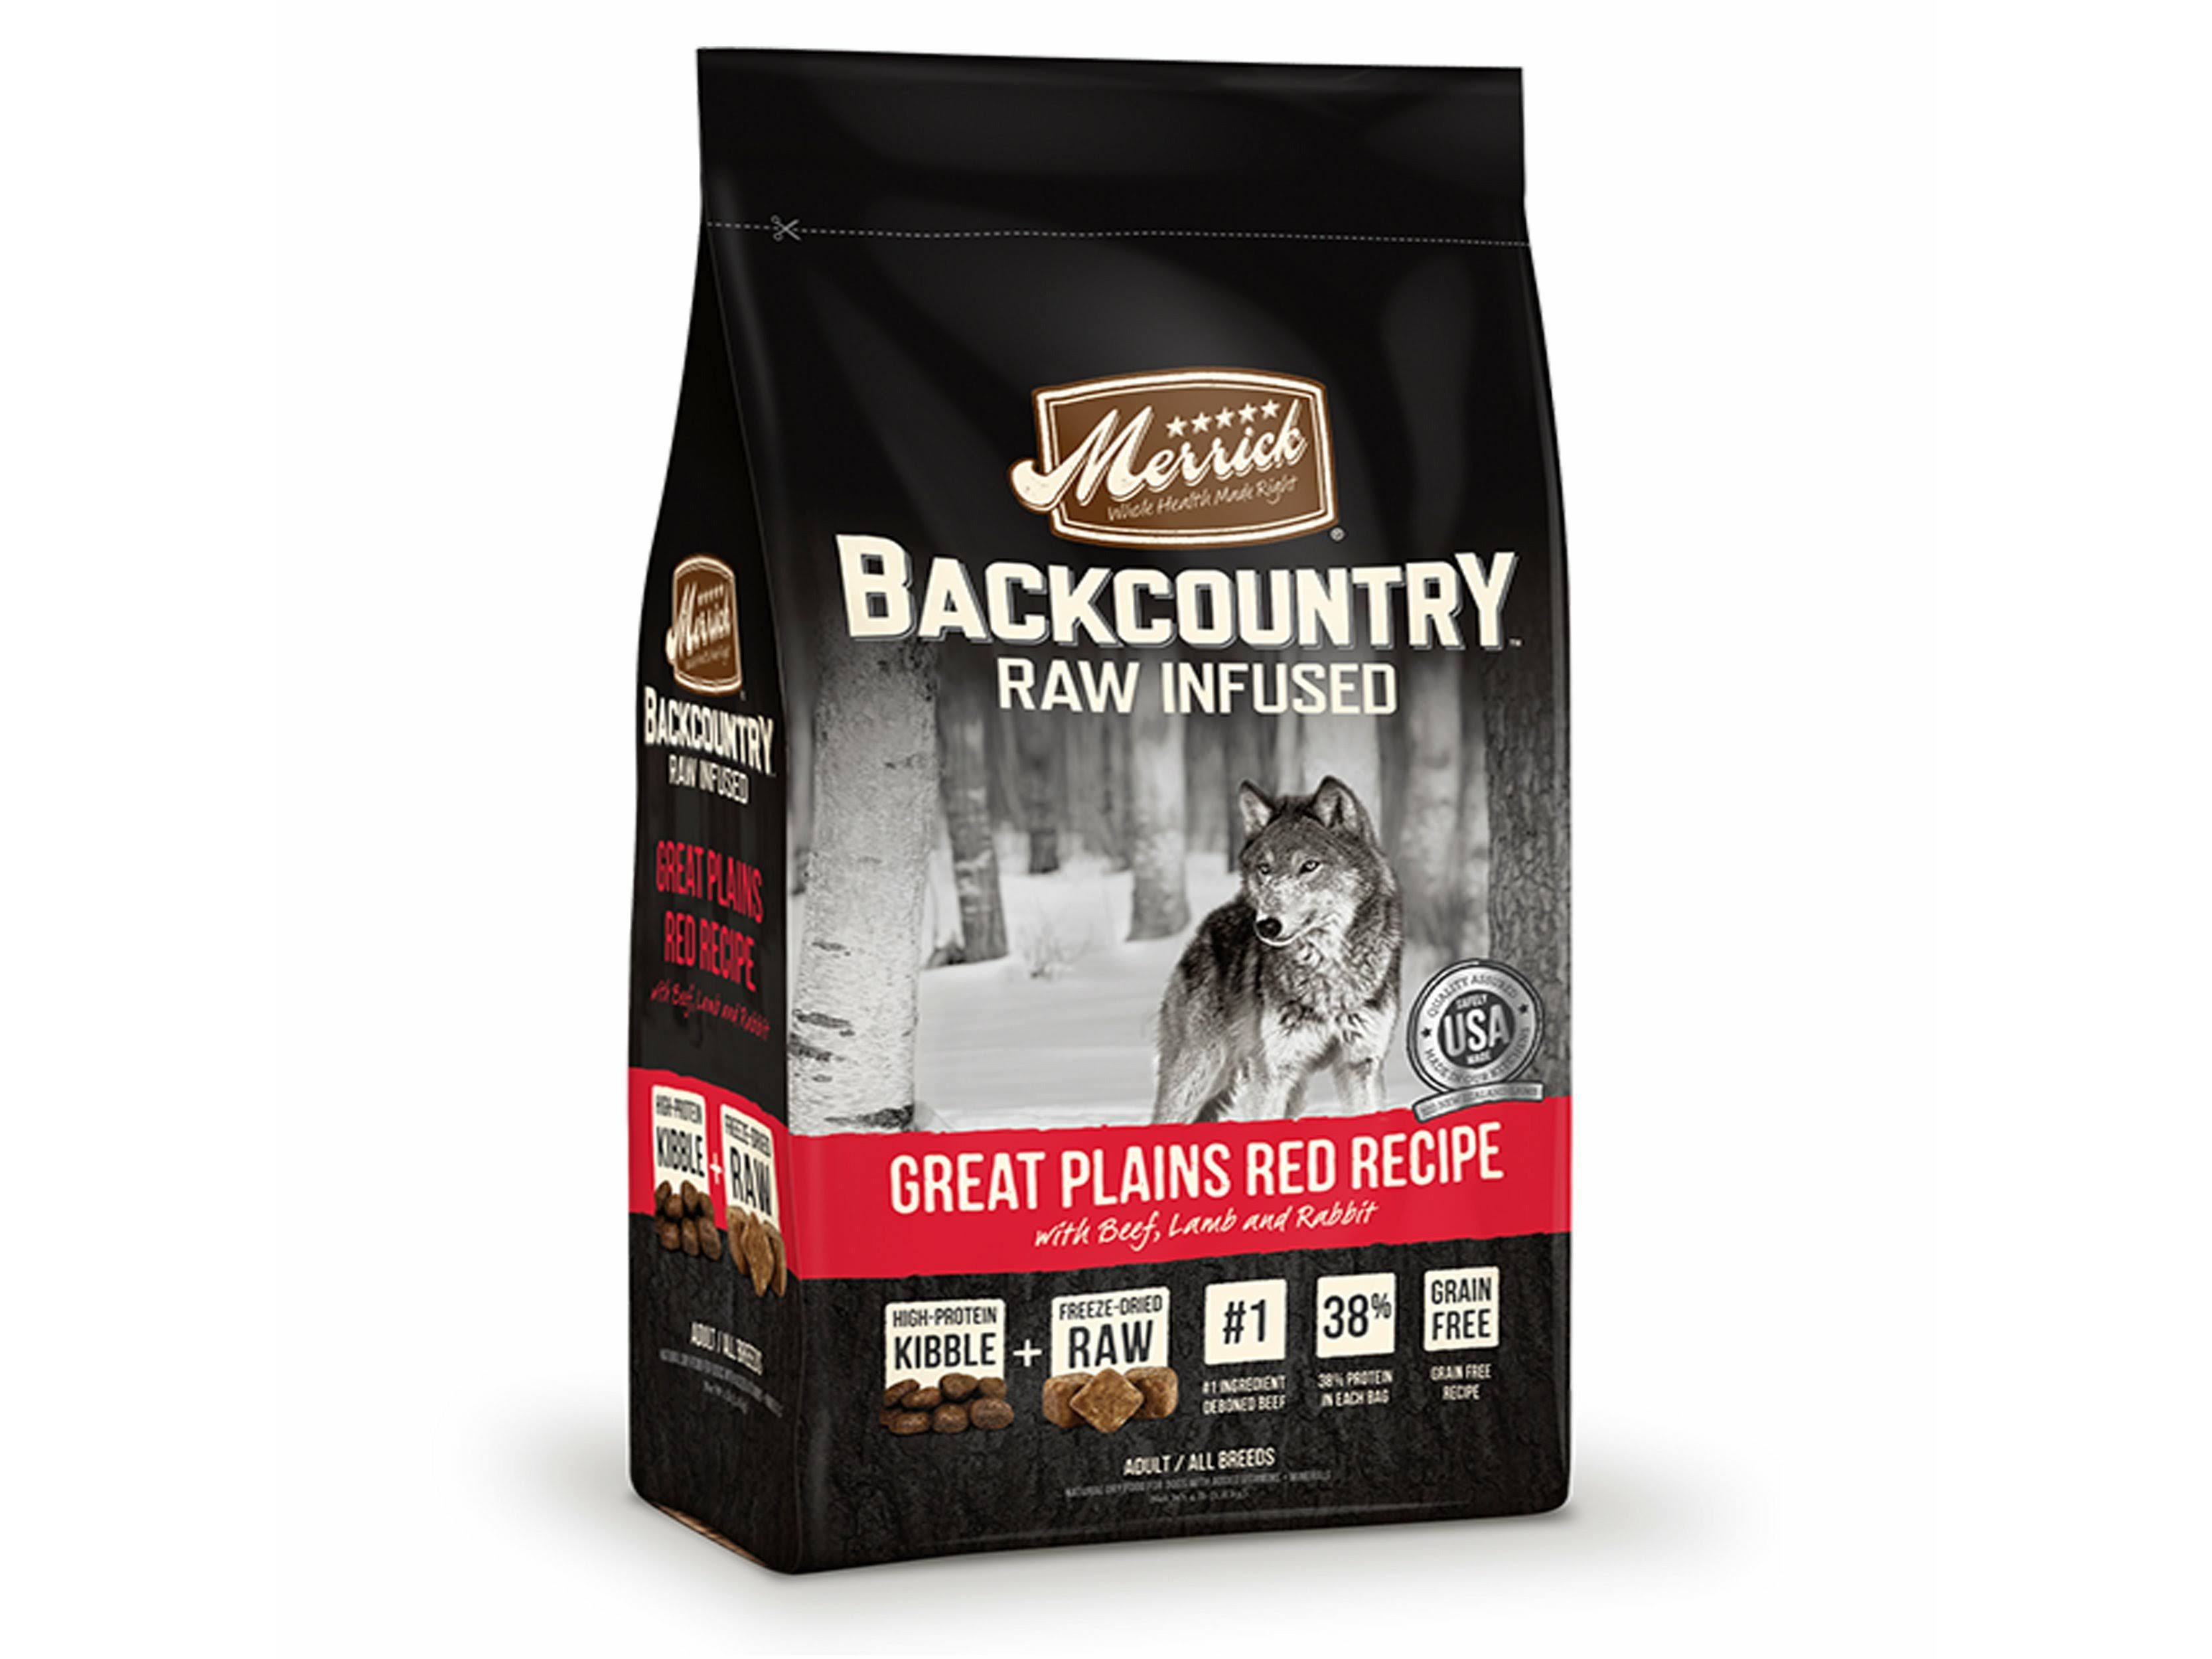 Merrick Backcountry Raw Infused Grain-Free Dog Food - Great Plains Red Recipe